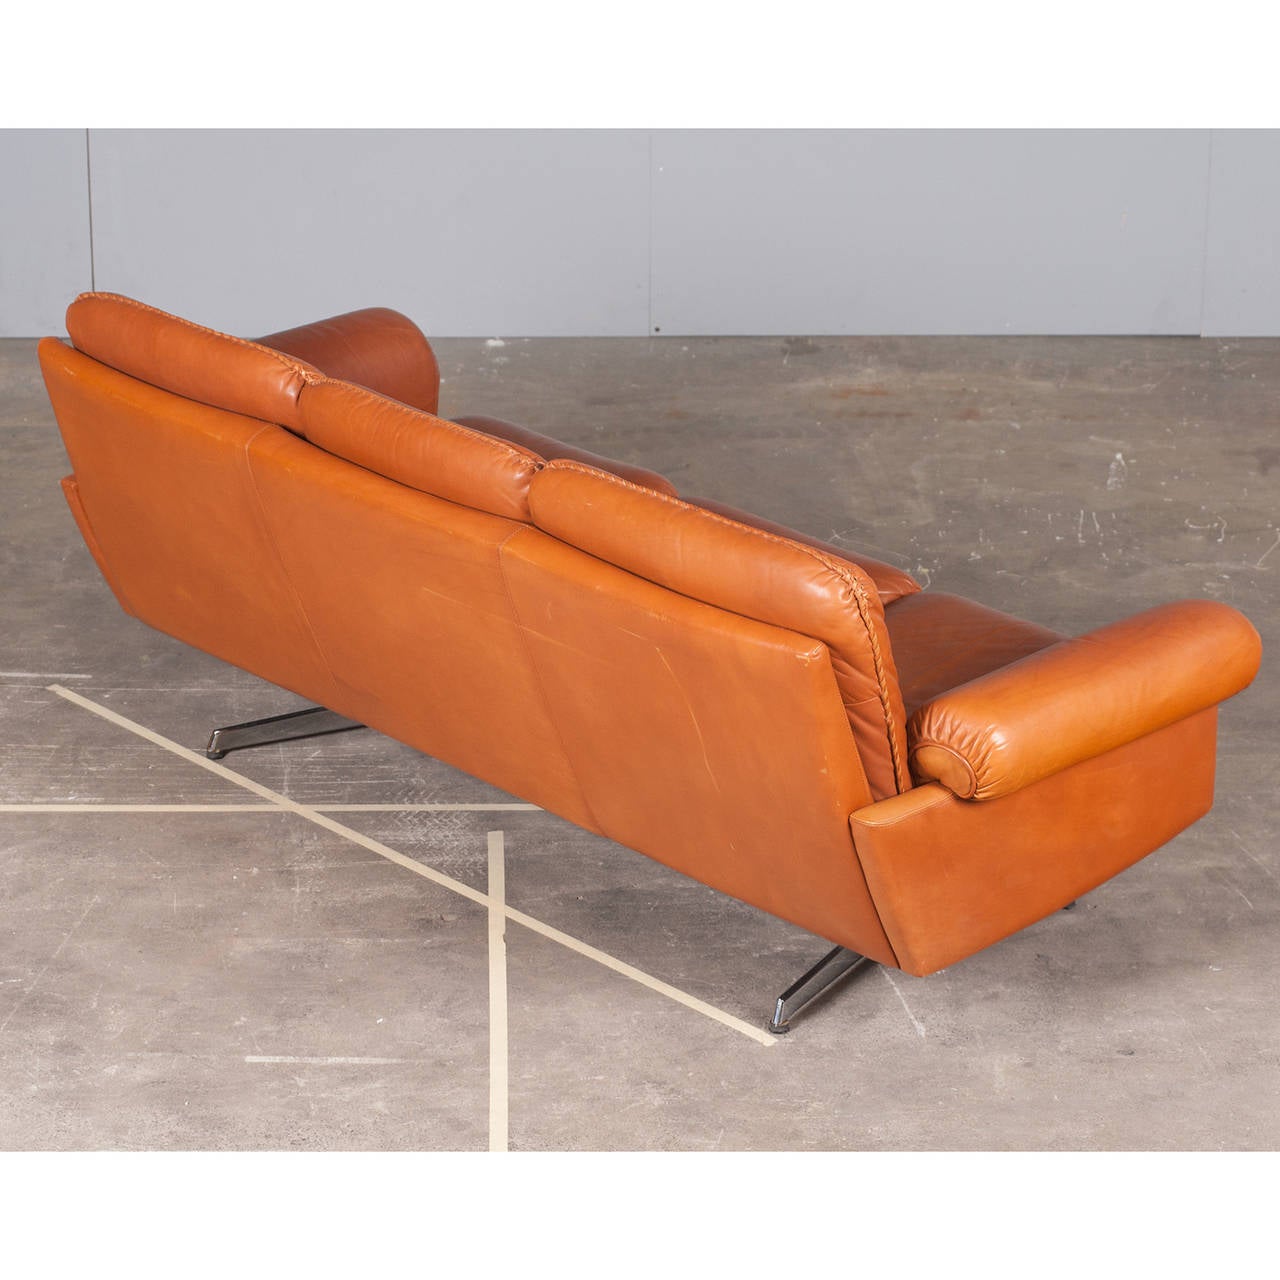 Swiss Three-Seater Sofa in Caramel Leather with Steel Base by De Sede, 1960s For Sale 1